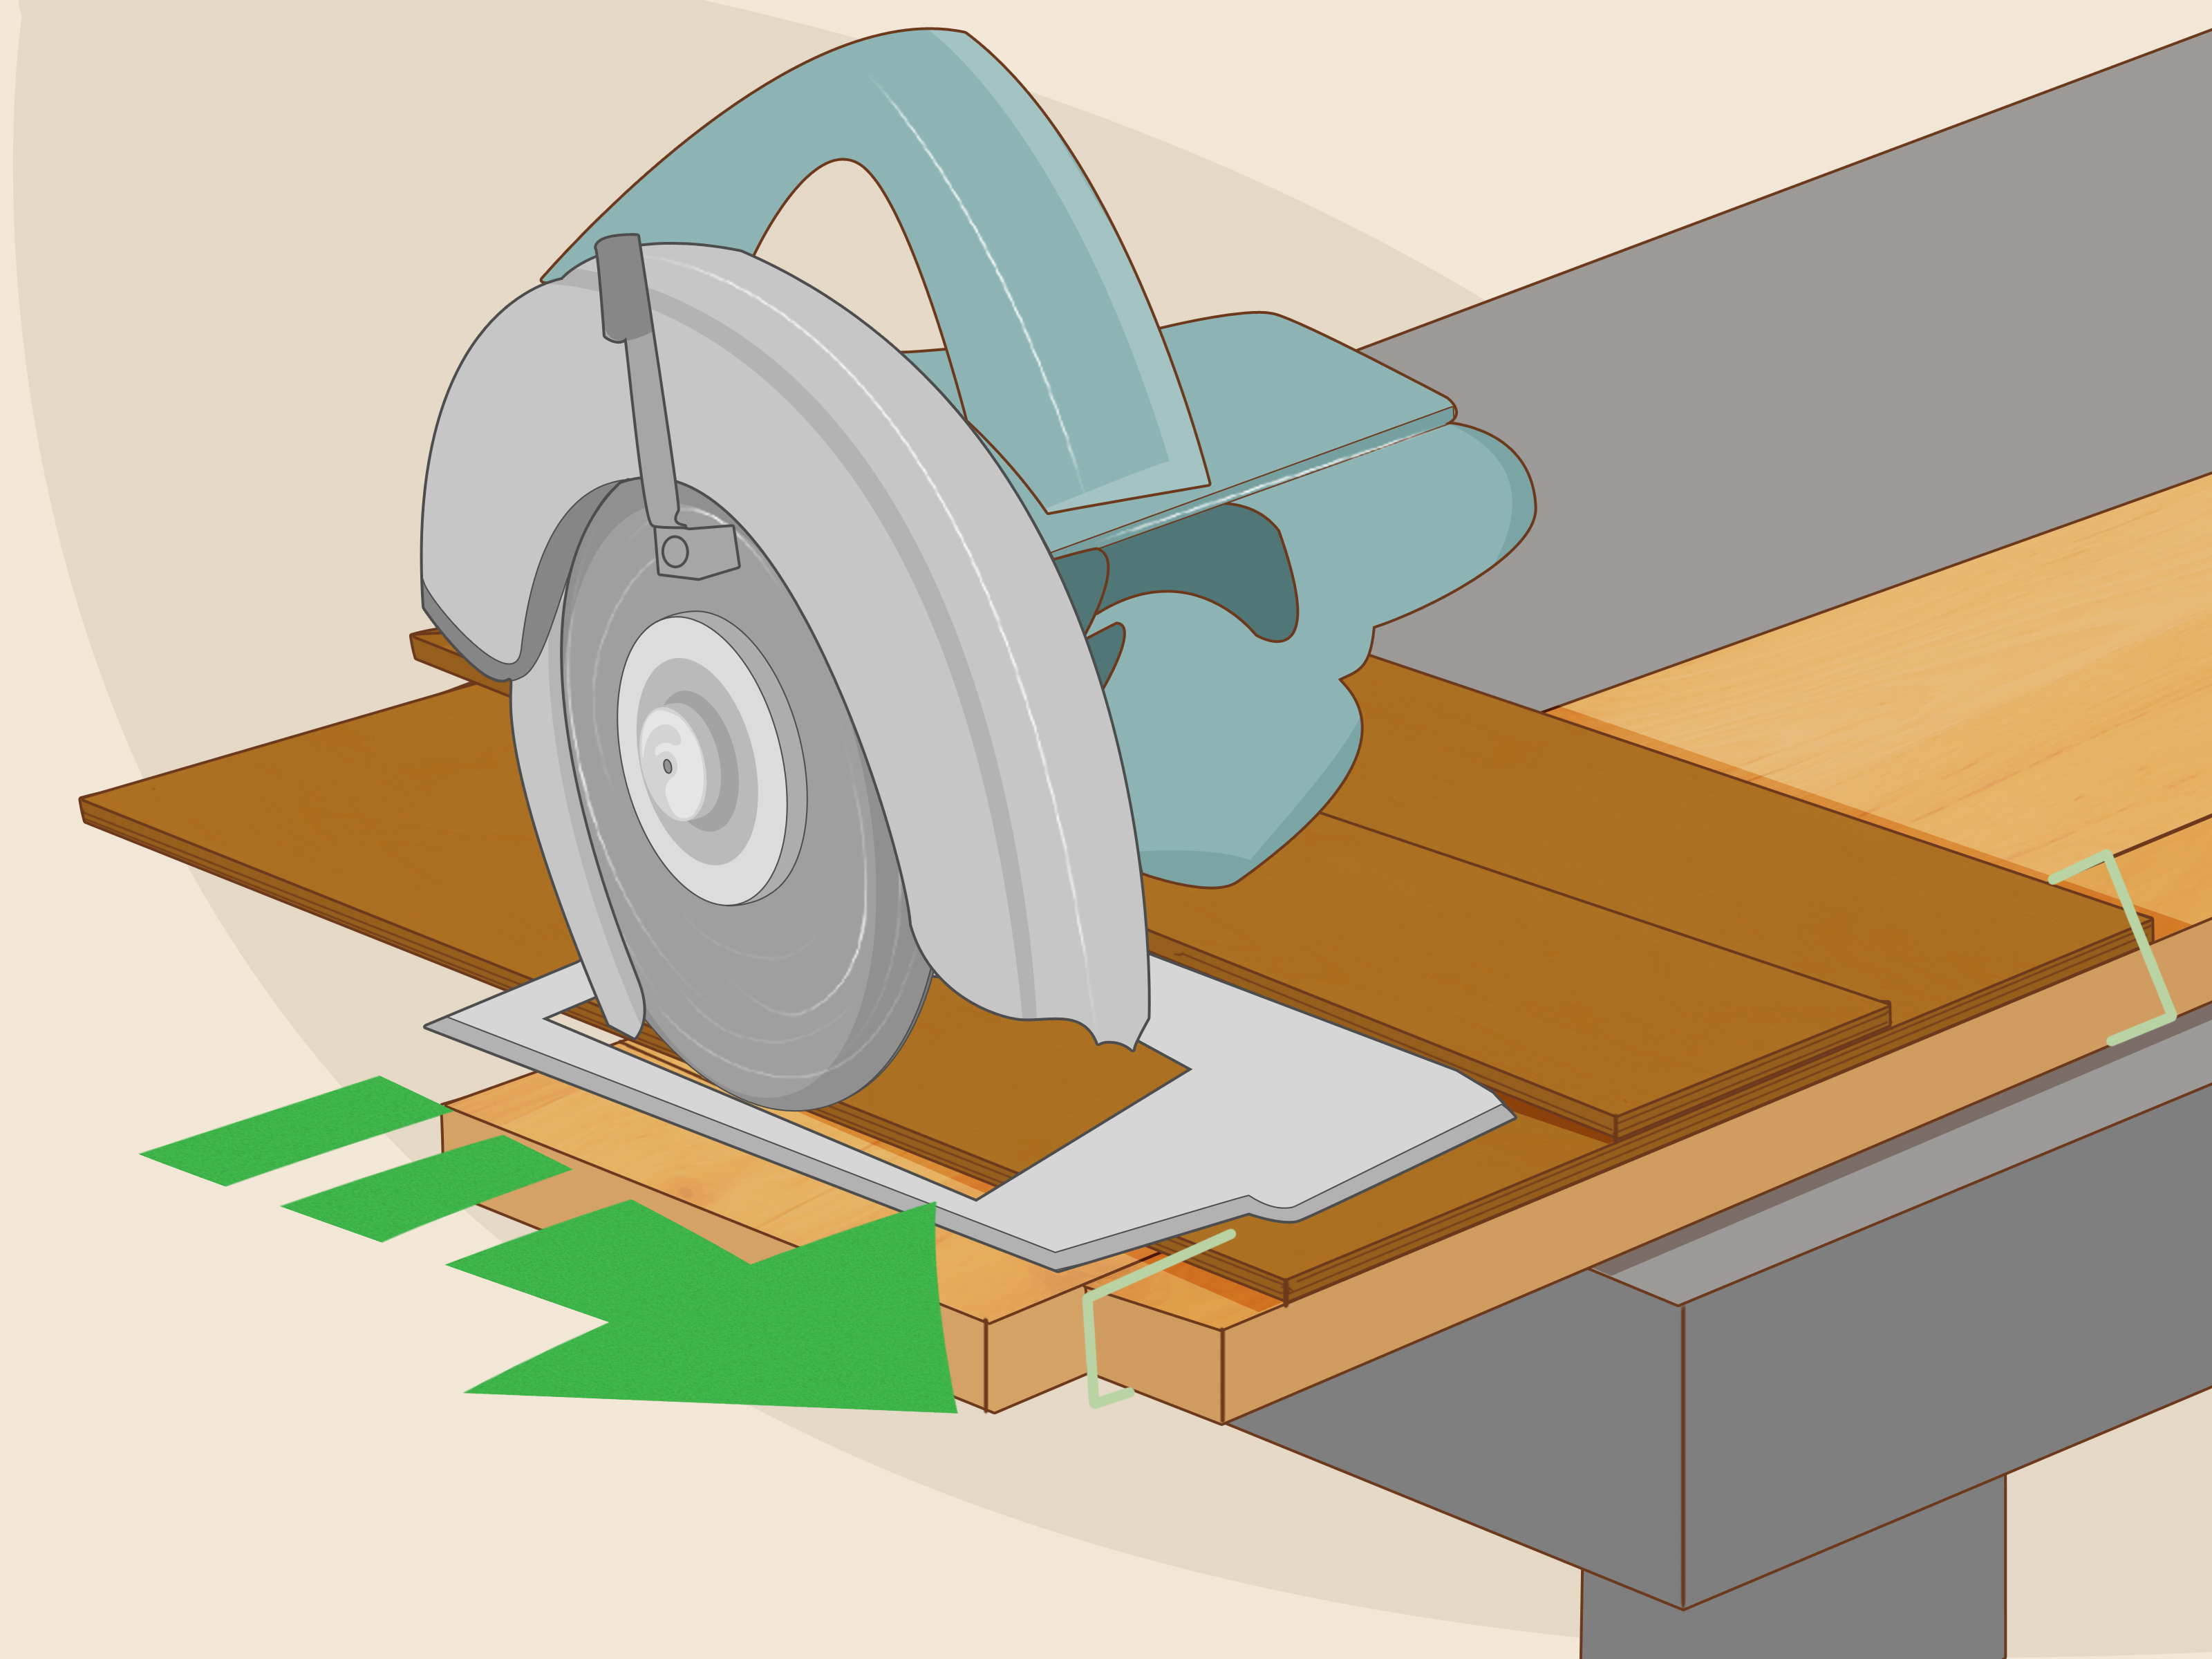 Image Titled Make Straight Cuts With A Circular Saw - HD Wallpaper 